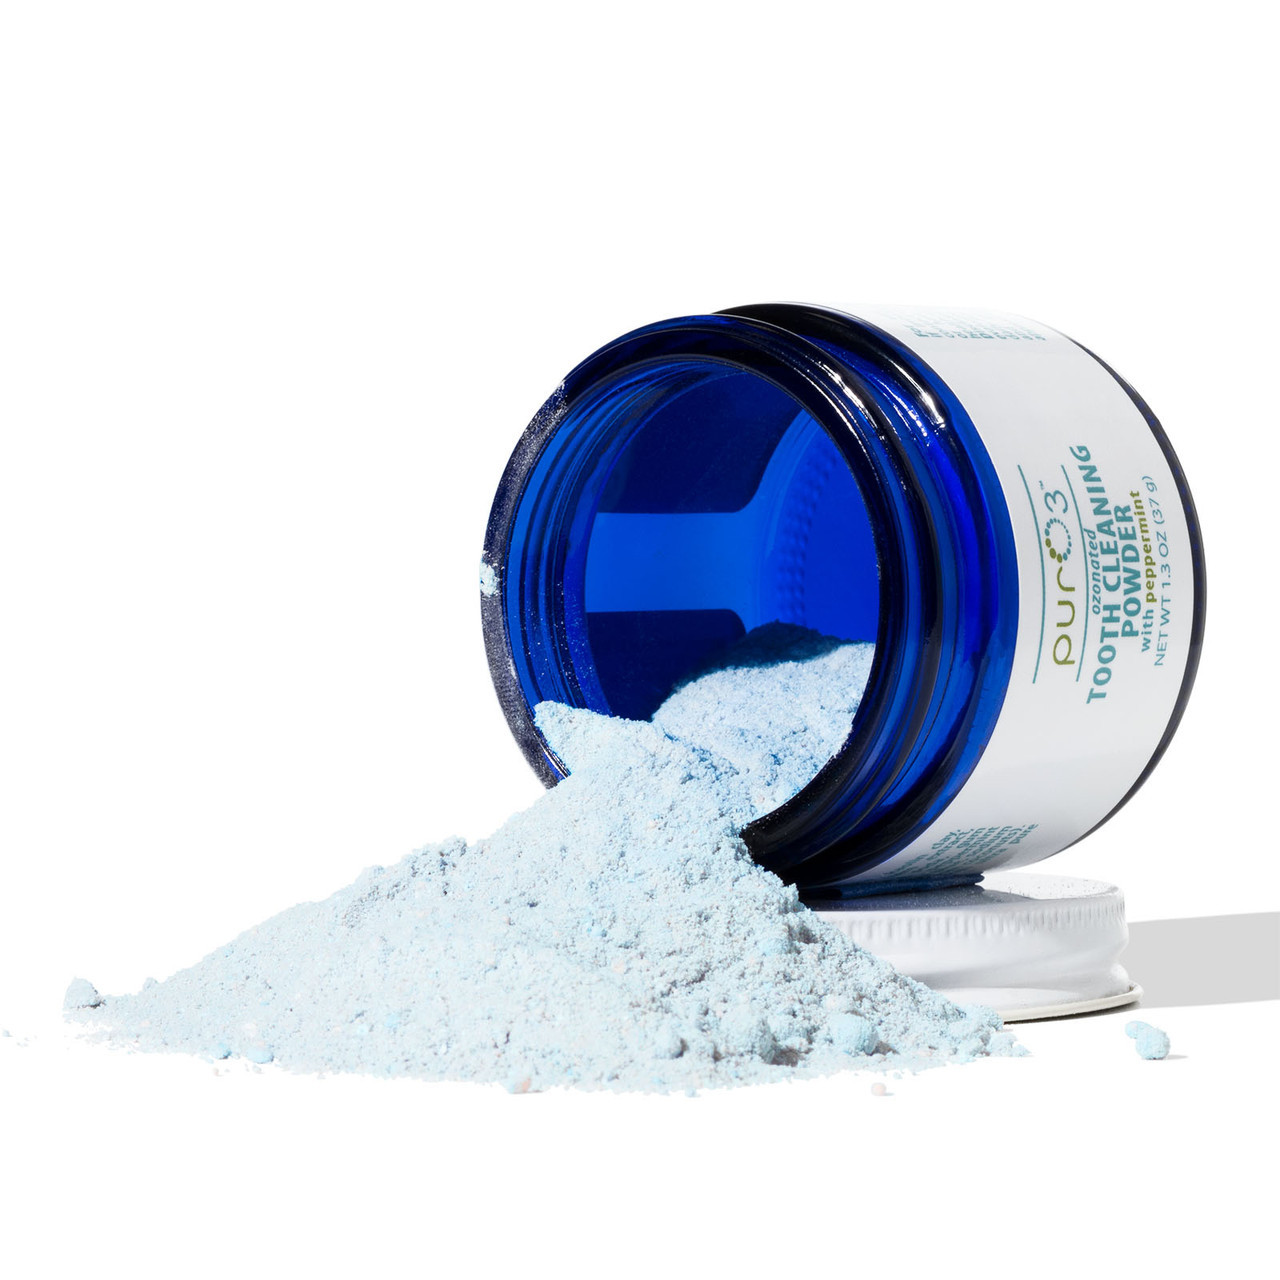 Ozonated Tooth Cleaning Powder